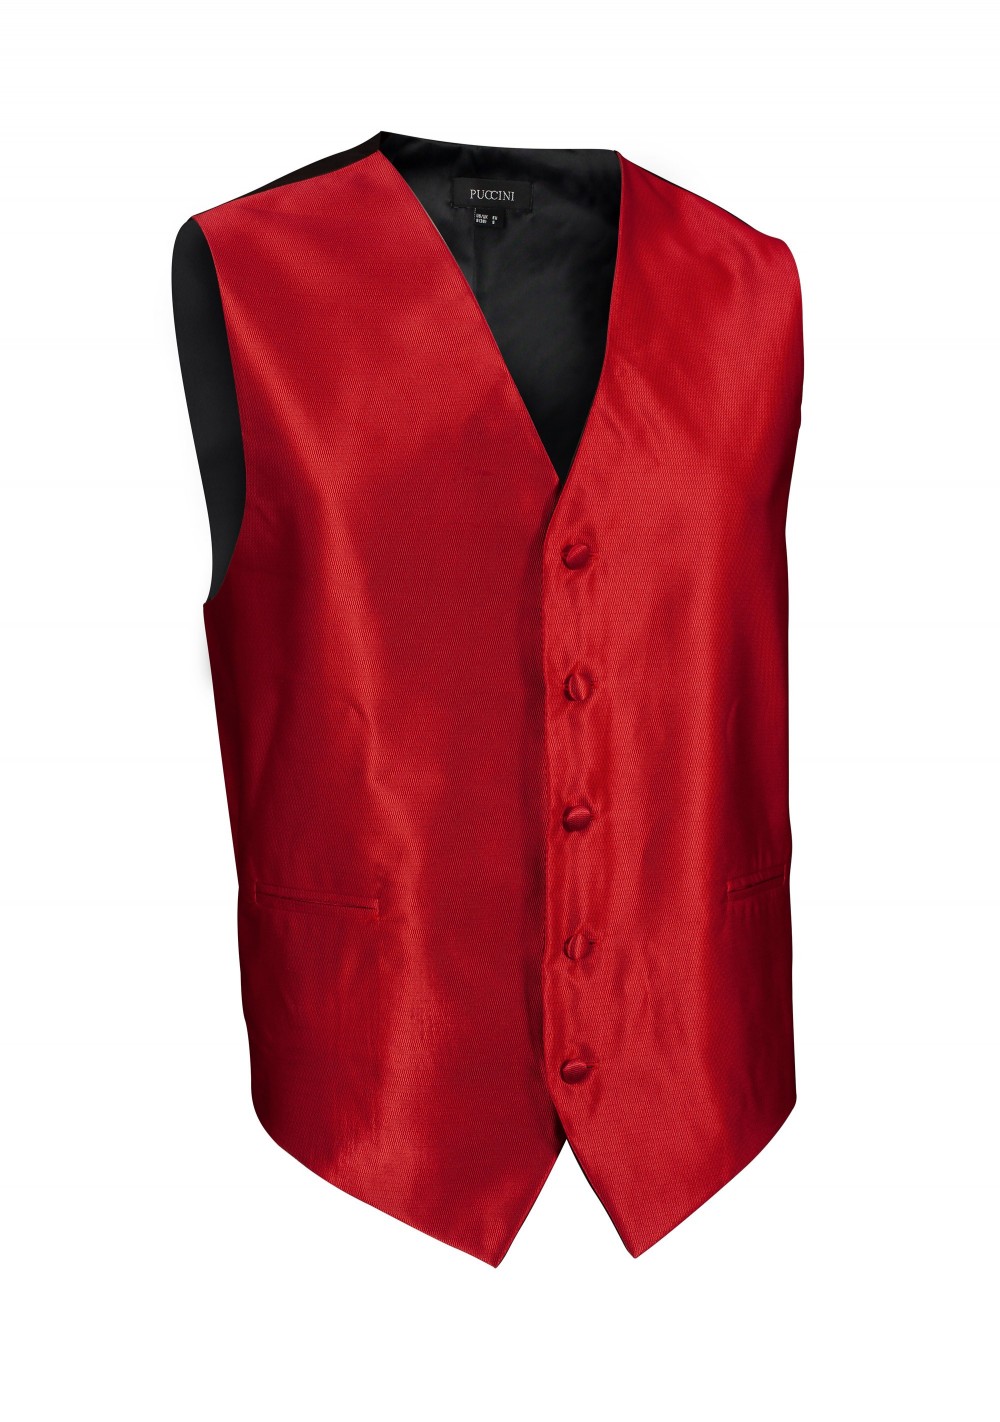 Formal Textured Dress Vest in Bright Ruby Red